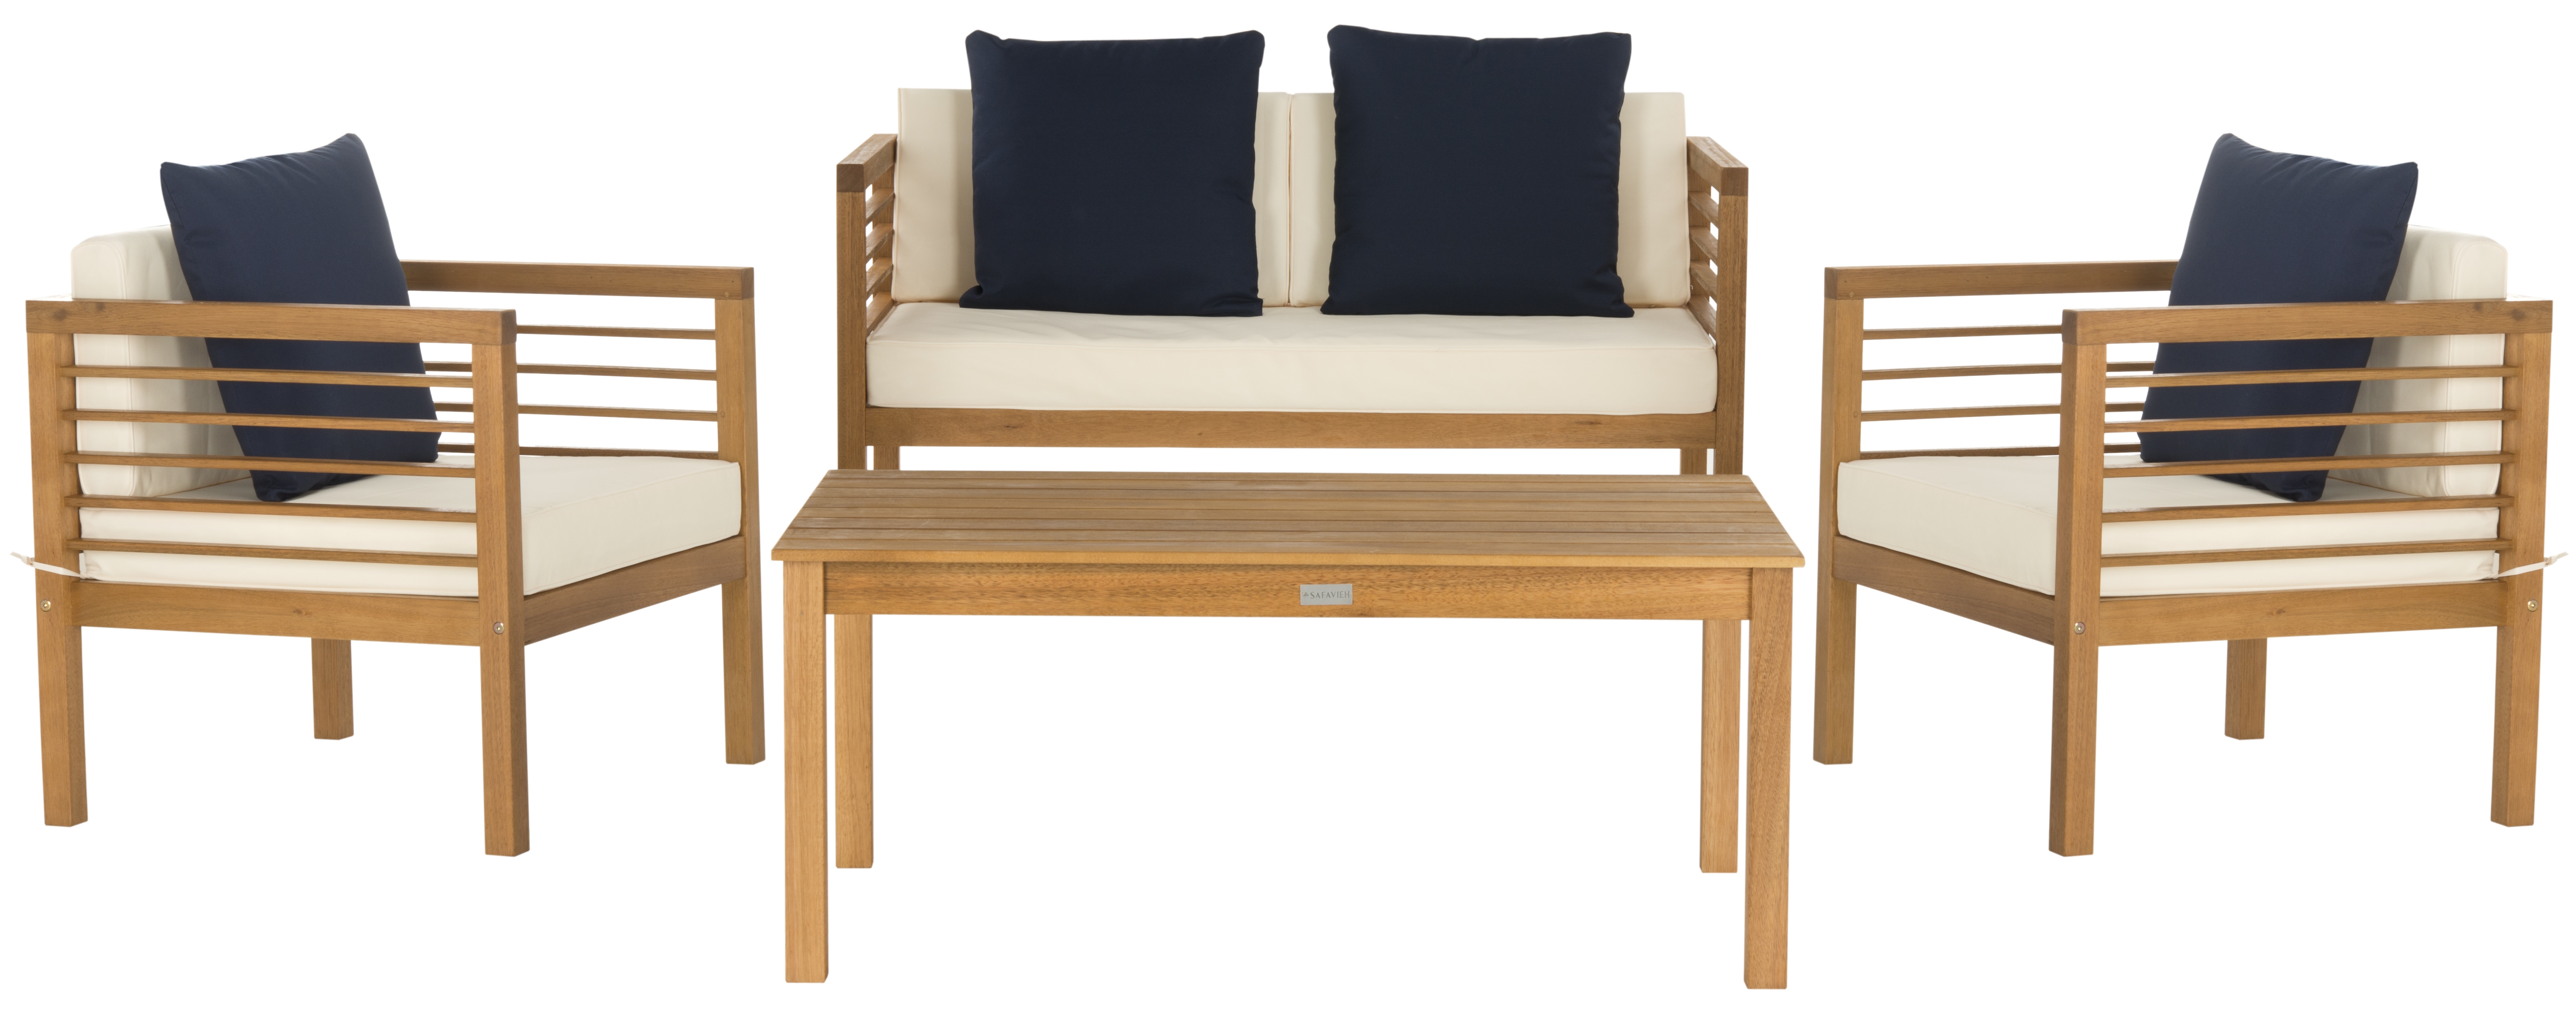 Alda 4 Piece Outdoor Set With Accent Pillows - Natural/White/Navy - Arlo Home - Image 0